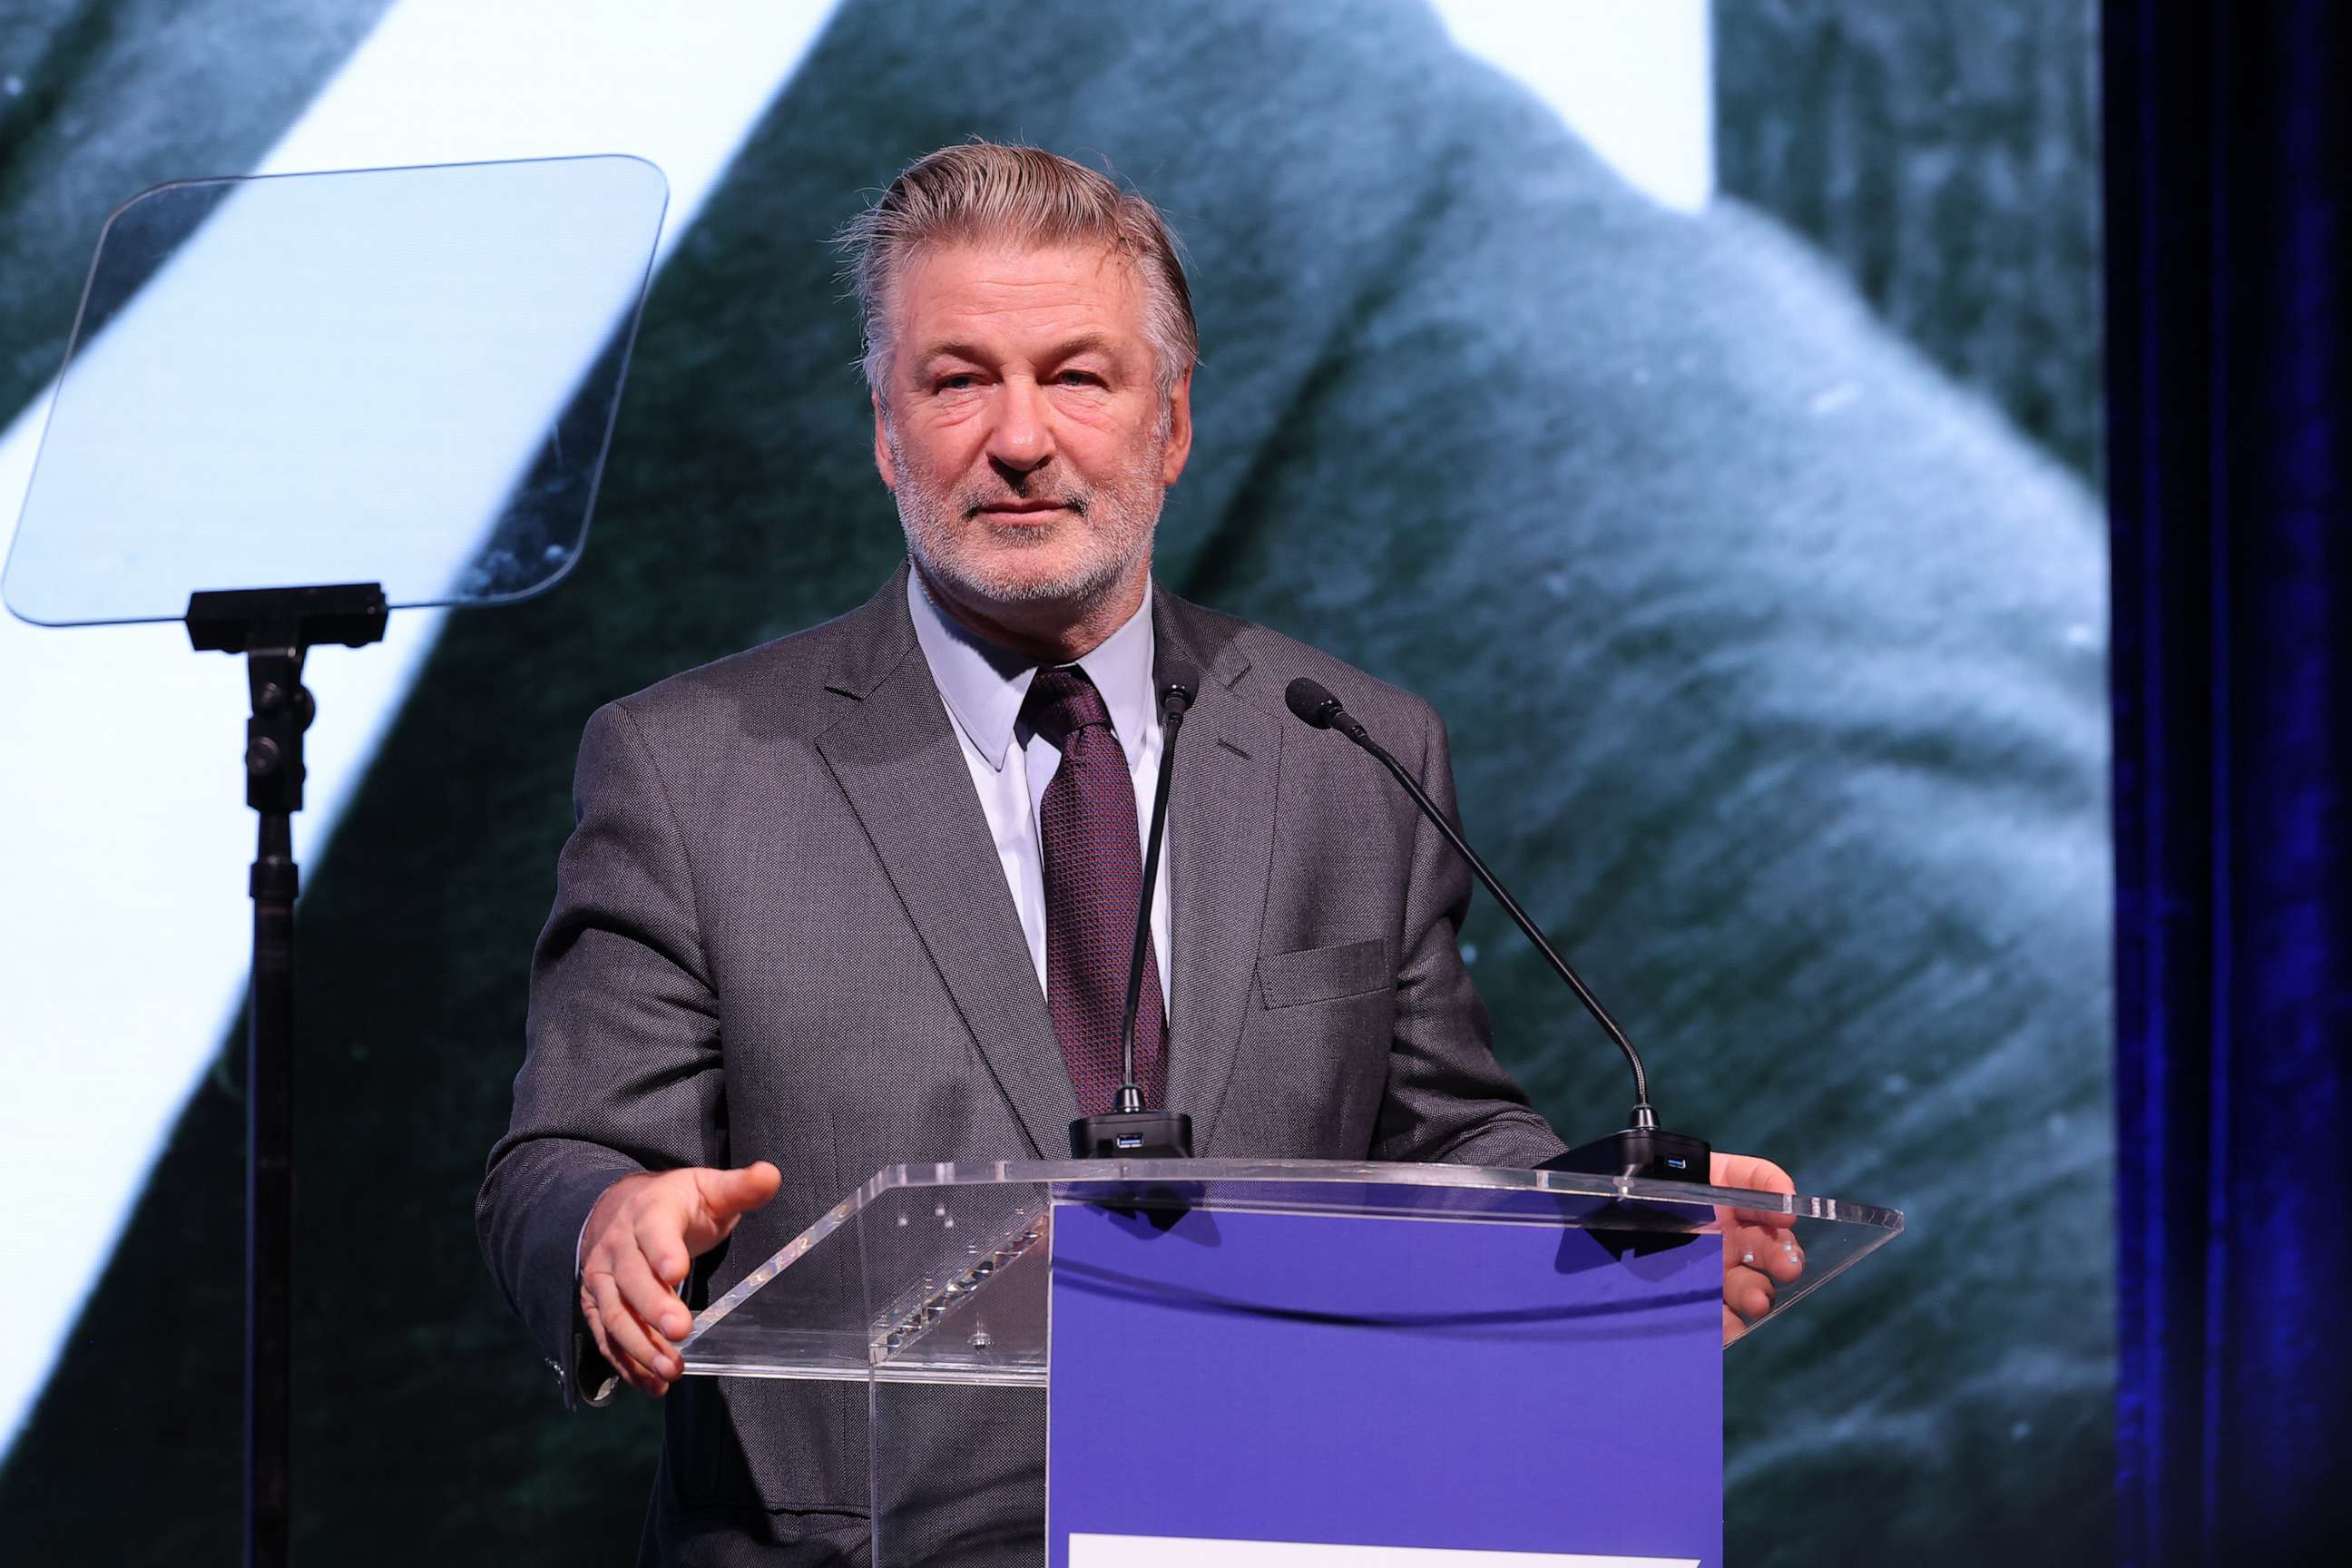 PHOTO: Alec Baldwin speaks onstage at the 2022 Robert F. Kennedy Human Rights Ripple of Hope Gala at New York Hilton, Dec. 6, 2022, in New York.